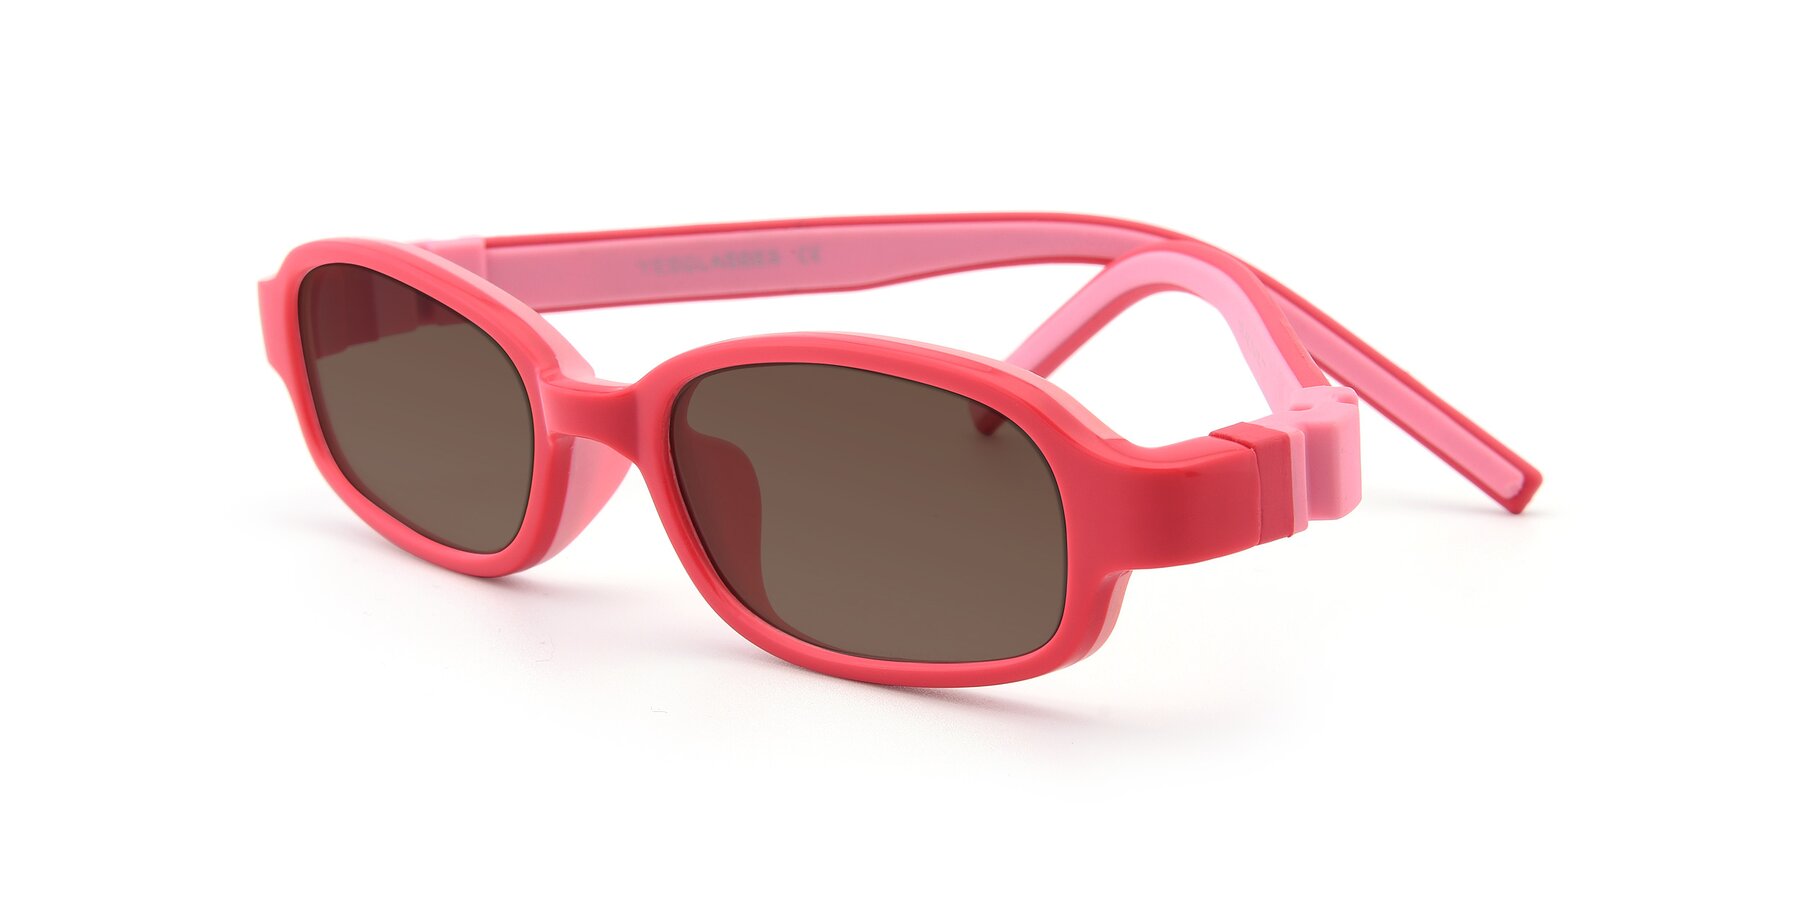 Angle of 515 in Red-Pink with Brown Tinted Lenses